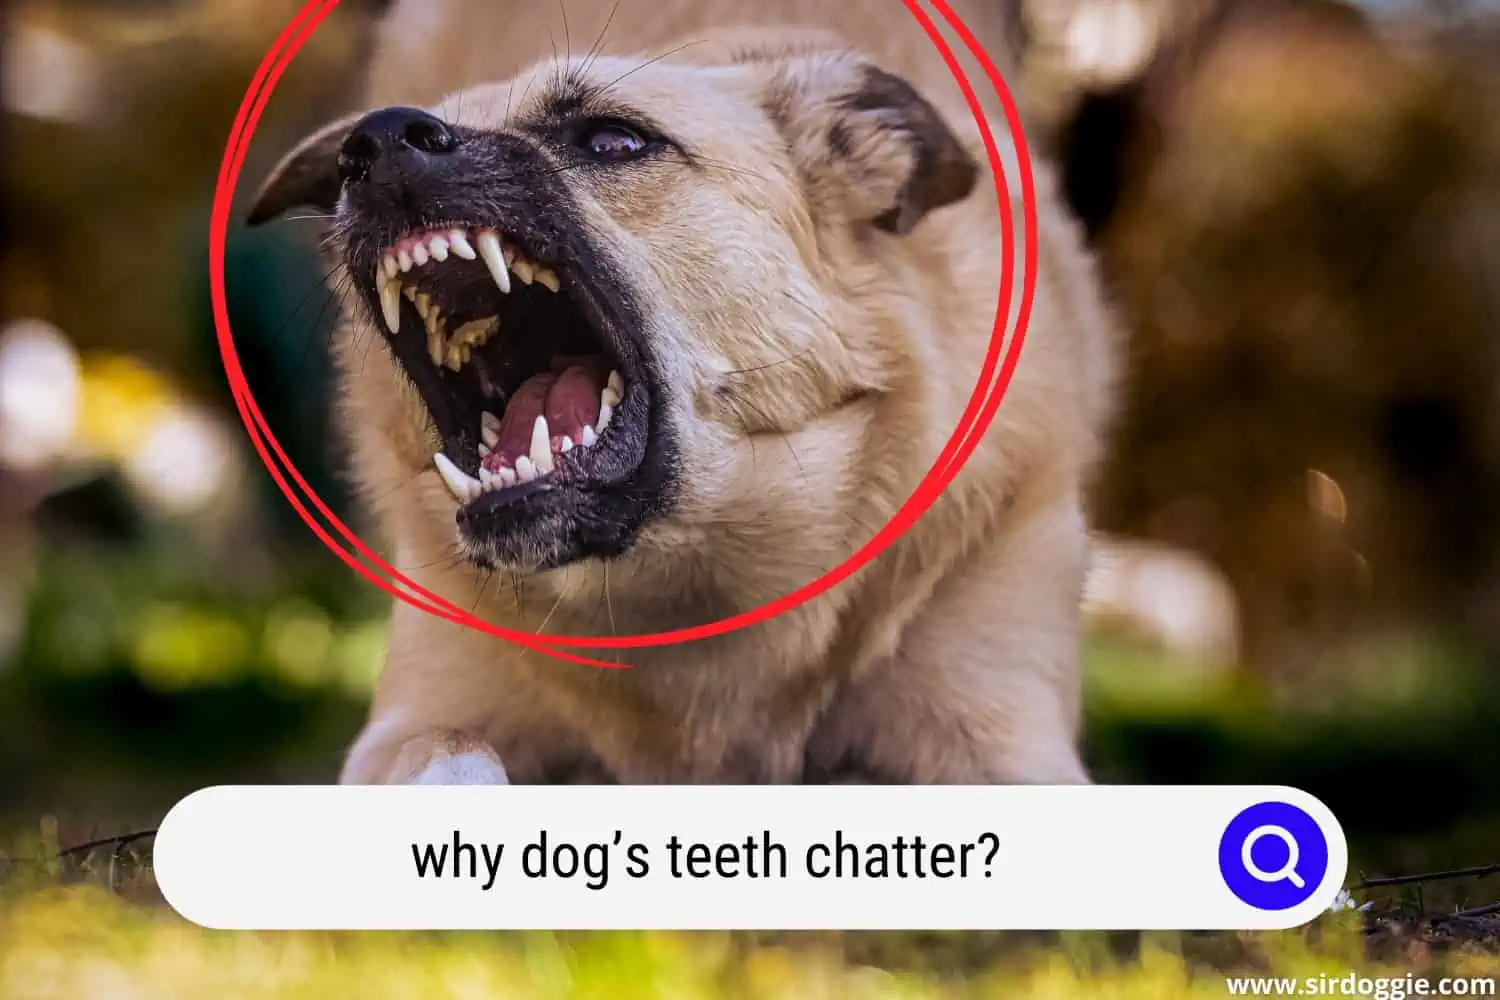 Dog's teeth chattering